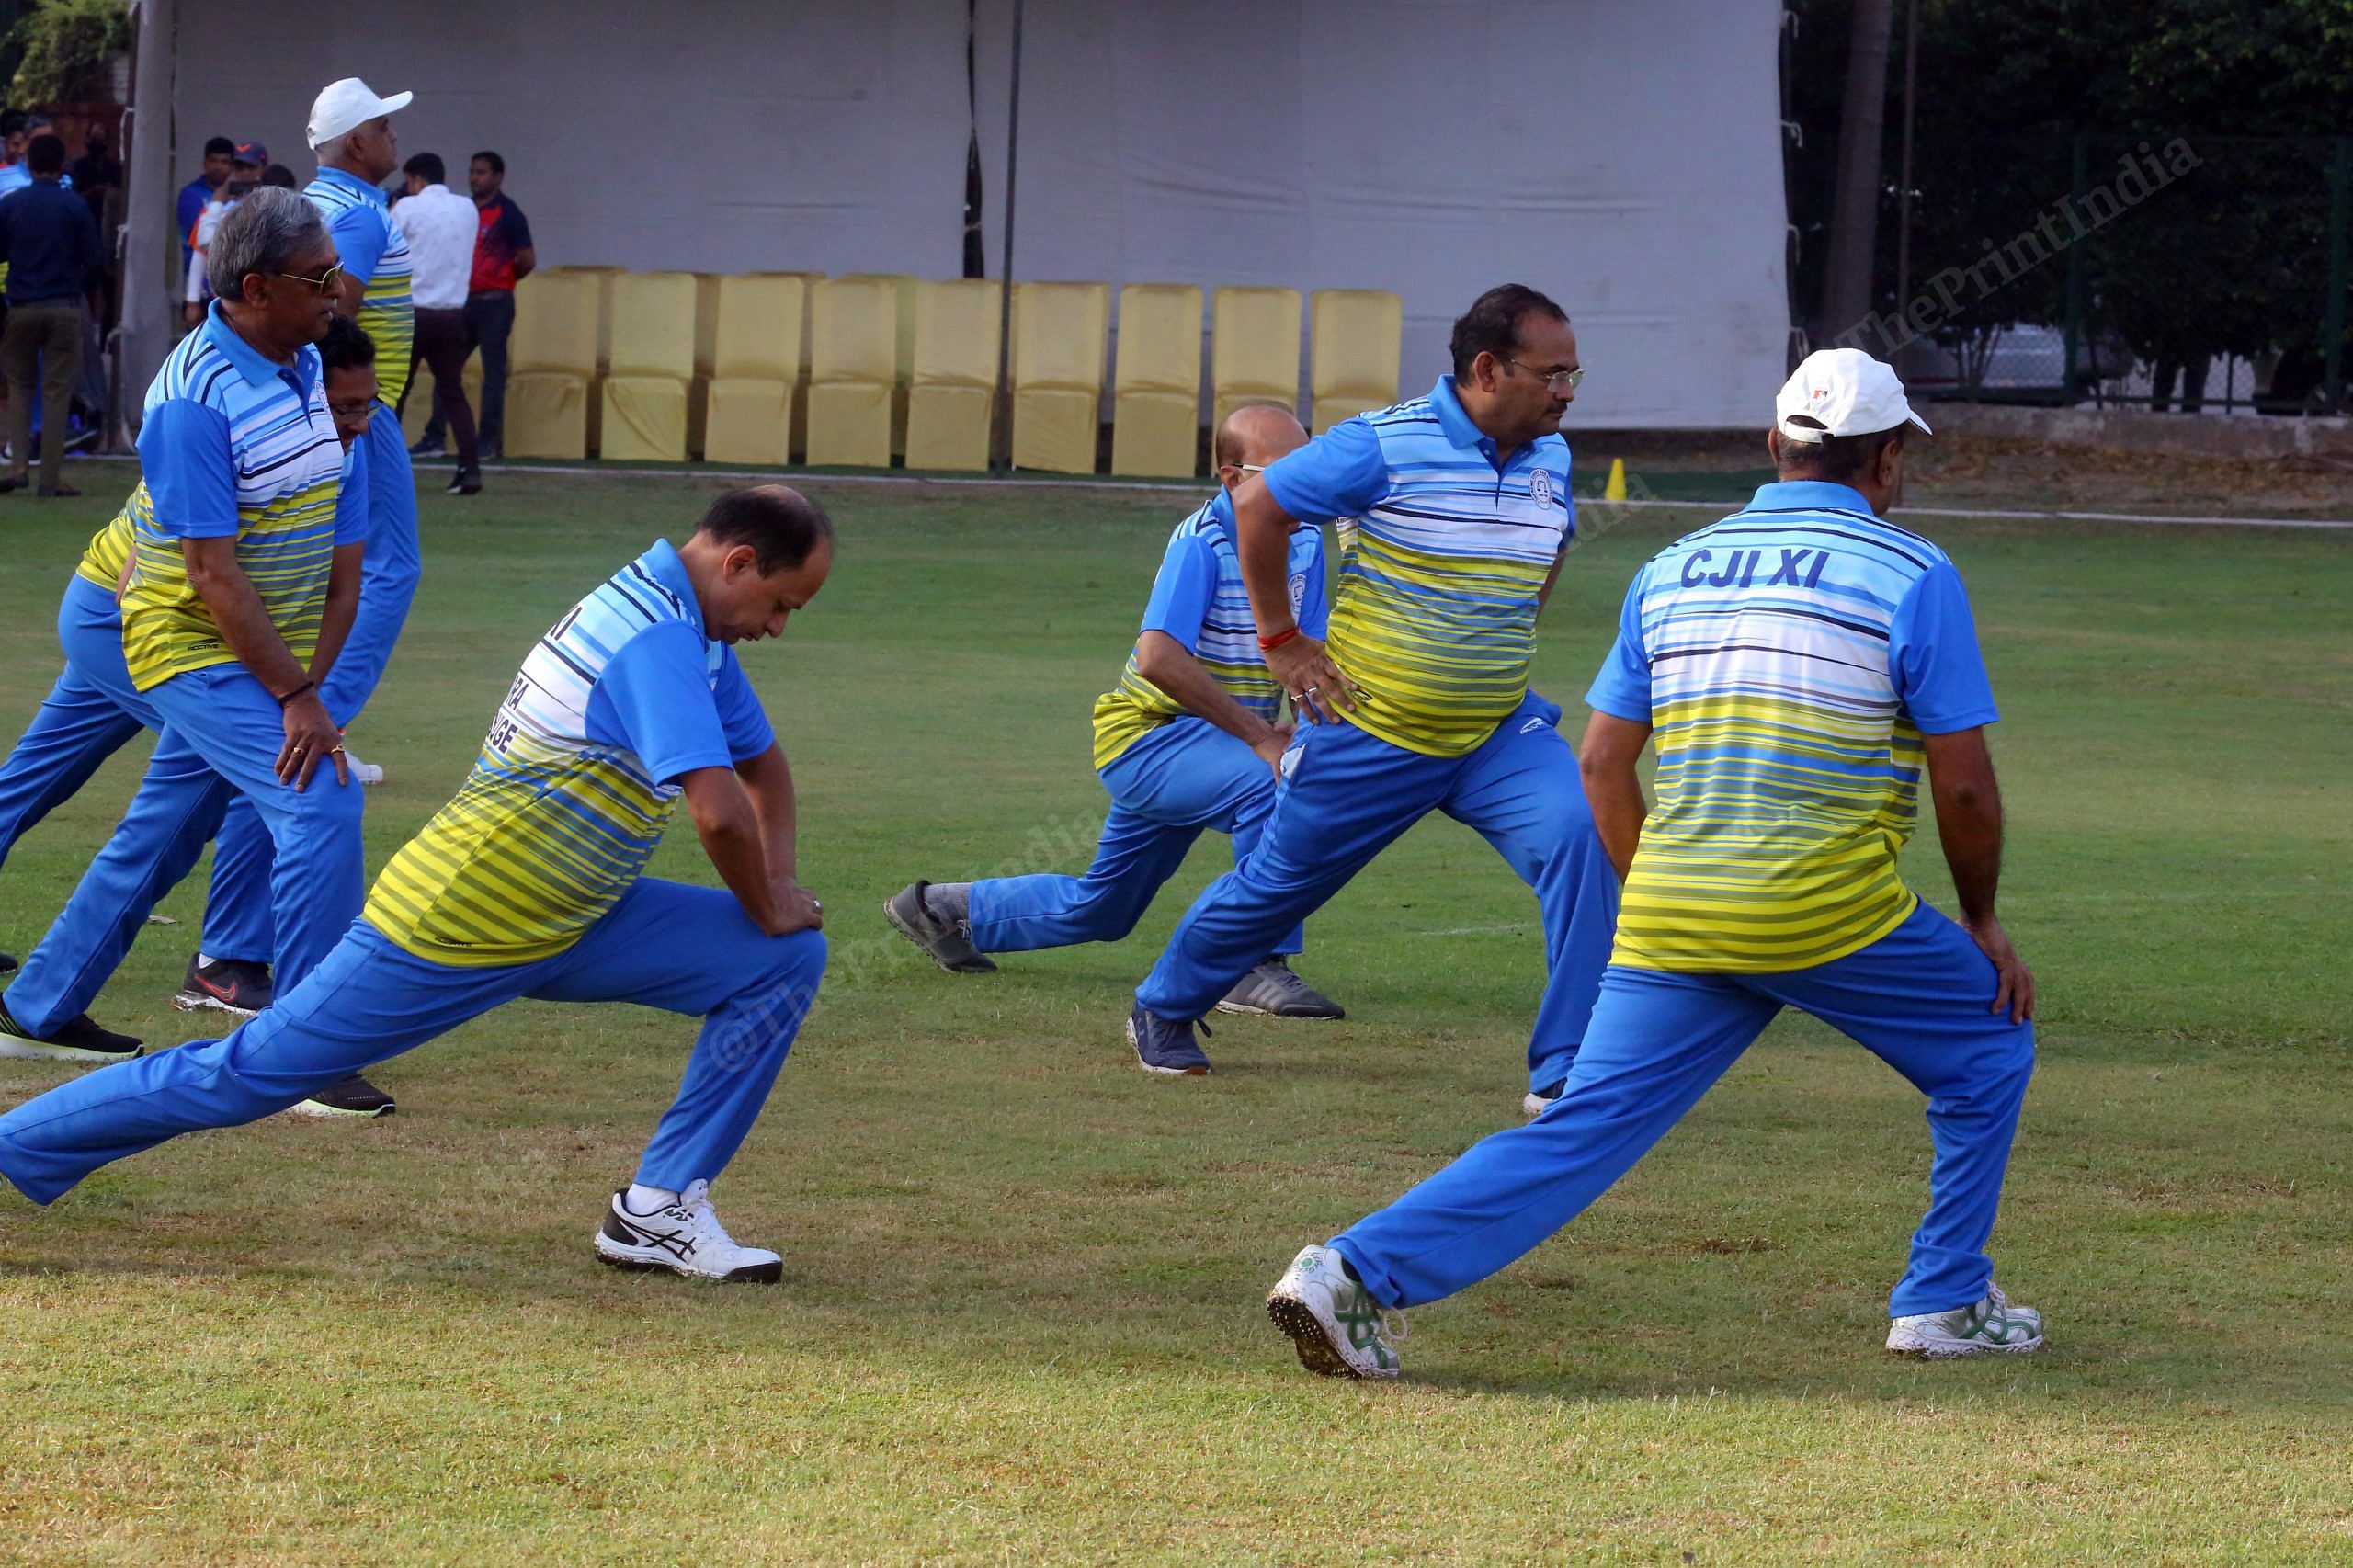 Players of CJI -Xl side warm up before the game begins | Photo: Praveen Jain | ThePrint